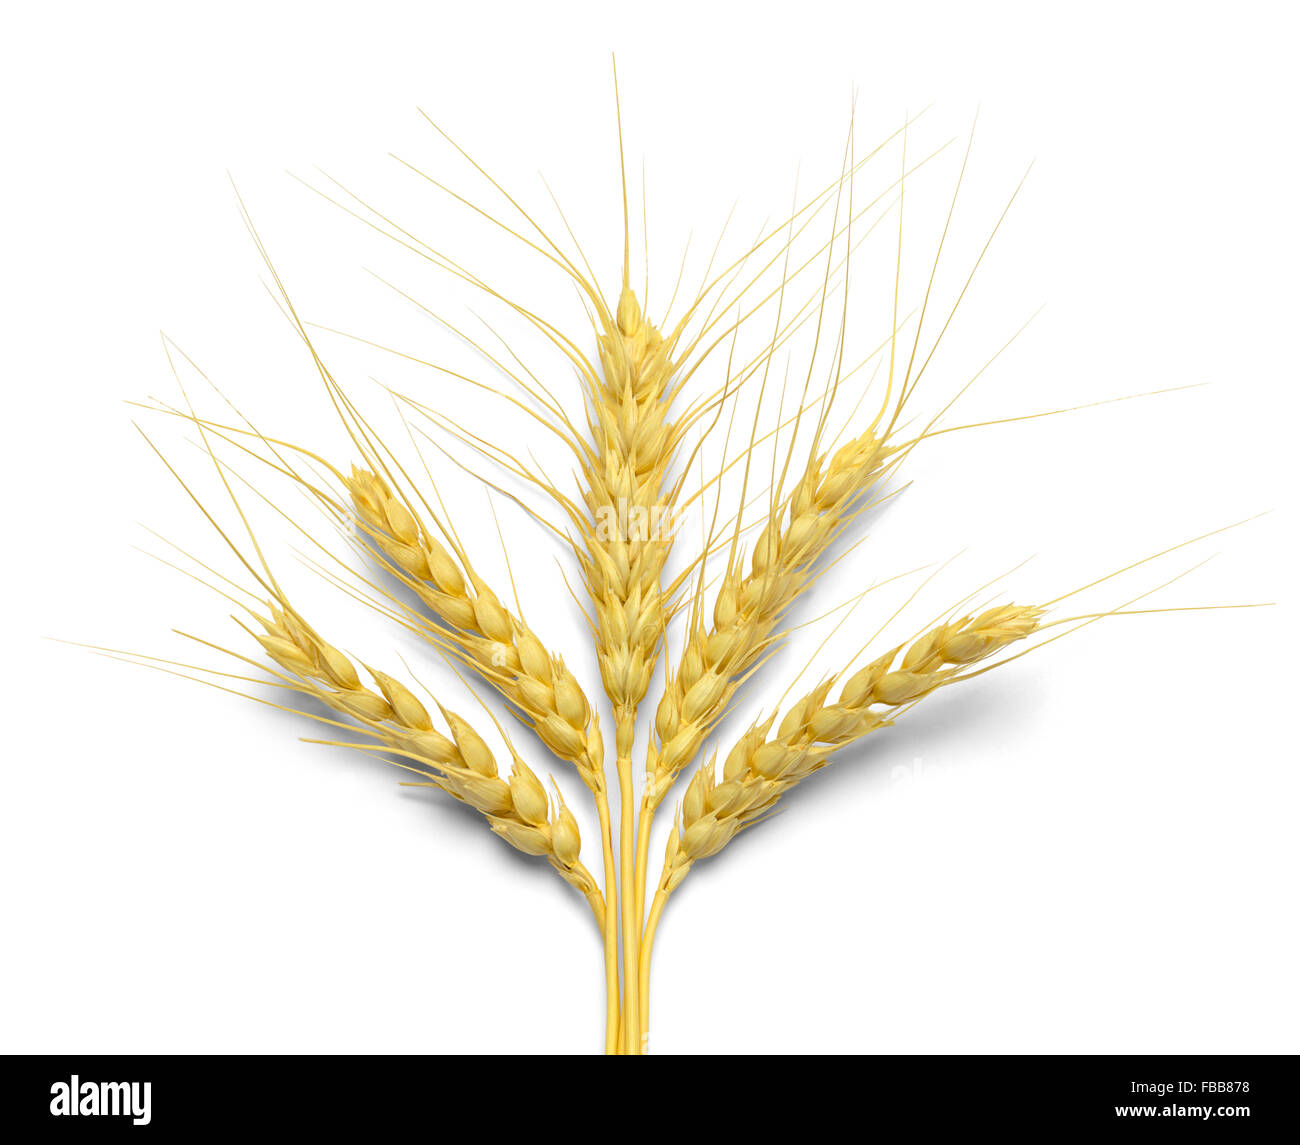 Five Stalks of Wheat Isolated on White Background. Stock Photo